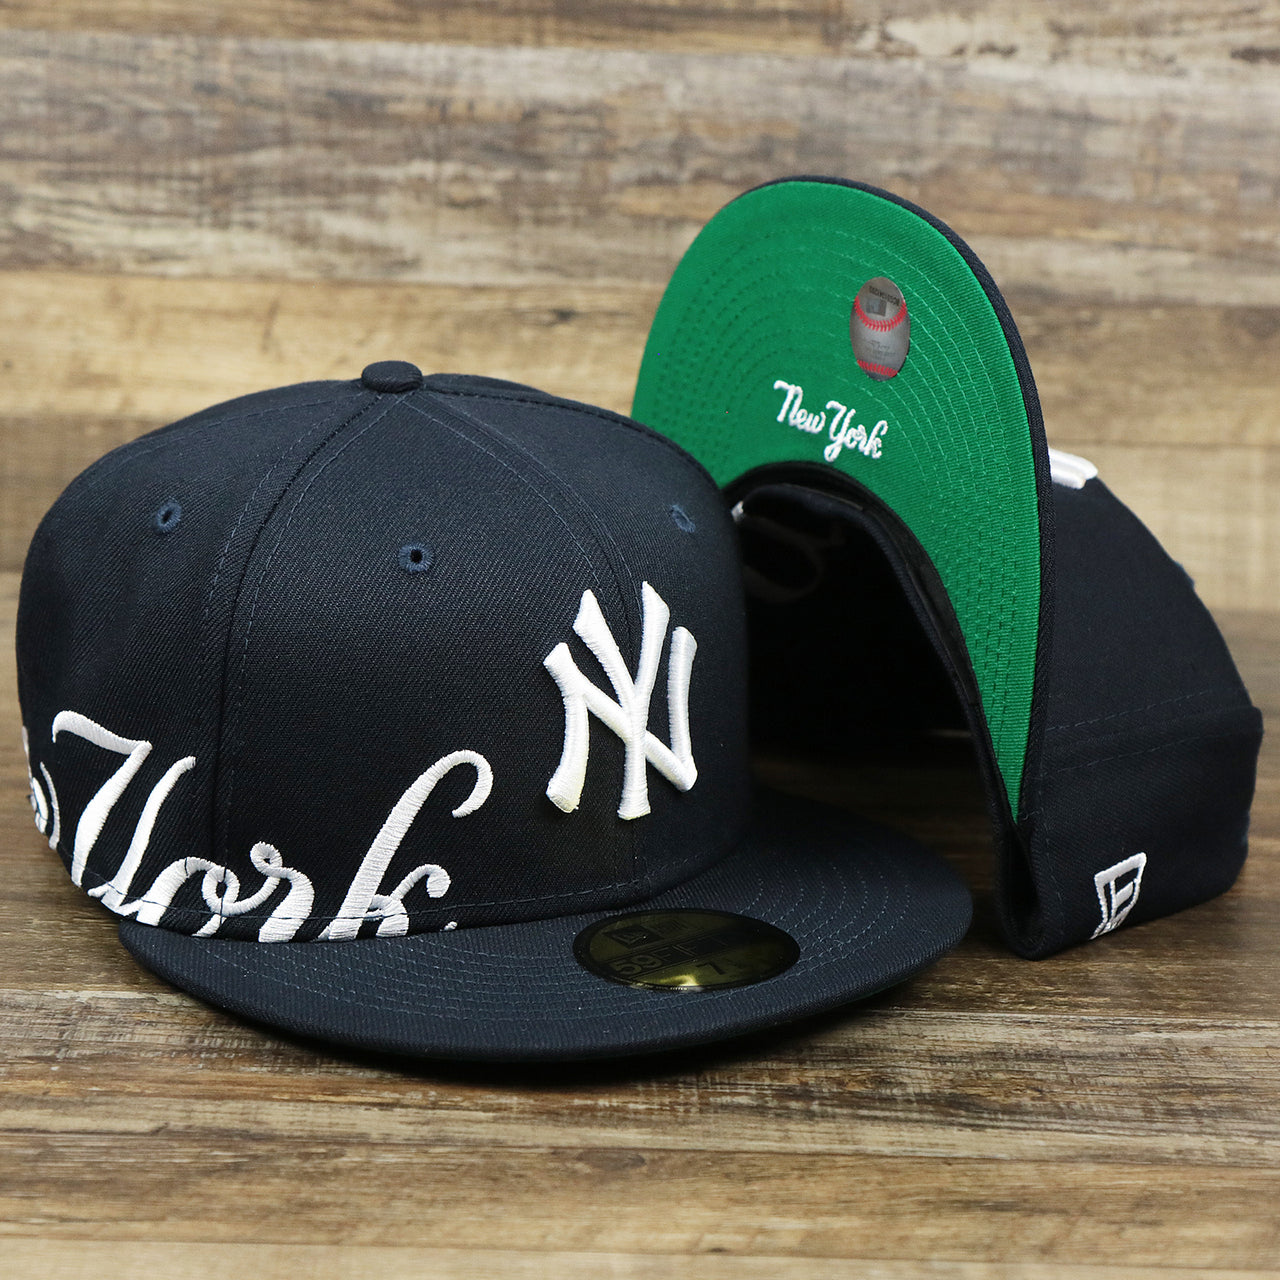 The New York Wordmark Side Split New York Yankees Vintage Green Bottom Embroidered Undervisor Fitted Cap | Navy Blue 59Fifty Cap